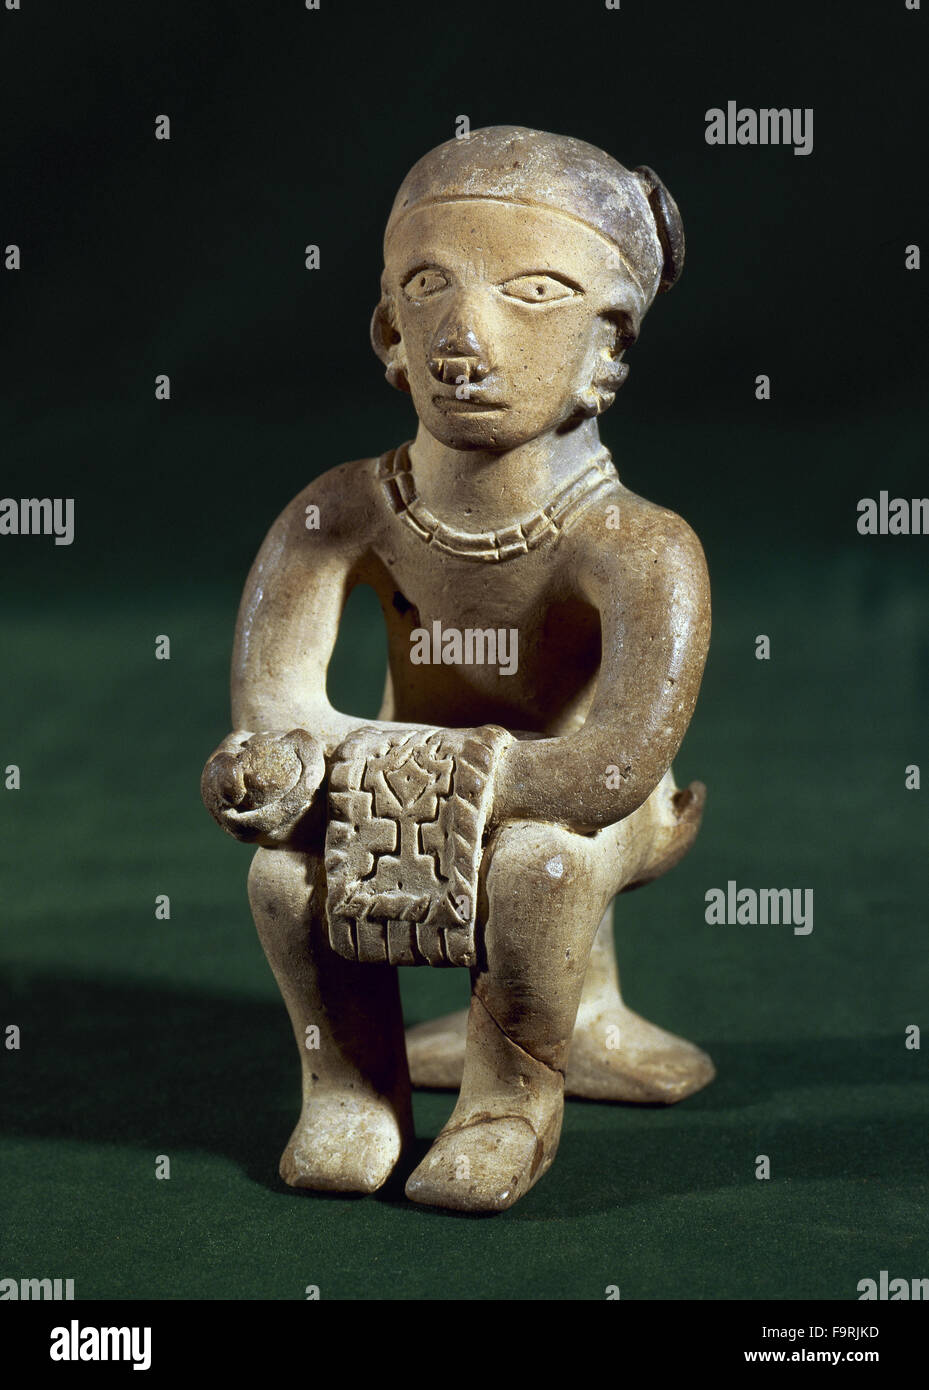 The Ancient Jama-Coaque Culture. Northern coast of Ecuador. 500 BC-500 AD. Ceramic figure made in mold. He holds in his hands a fabric. From Ecuadorina coast. Private collection. Stock Photo